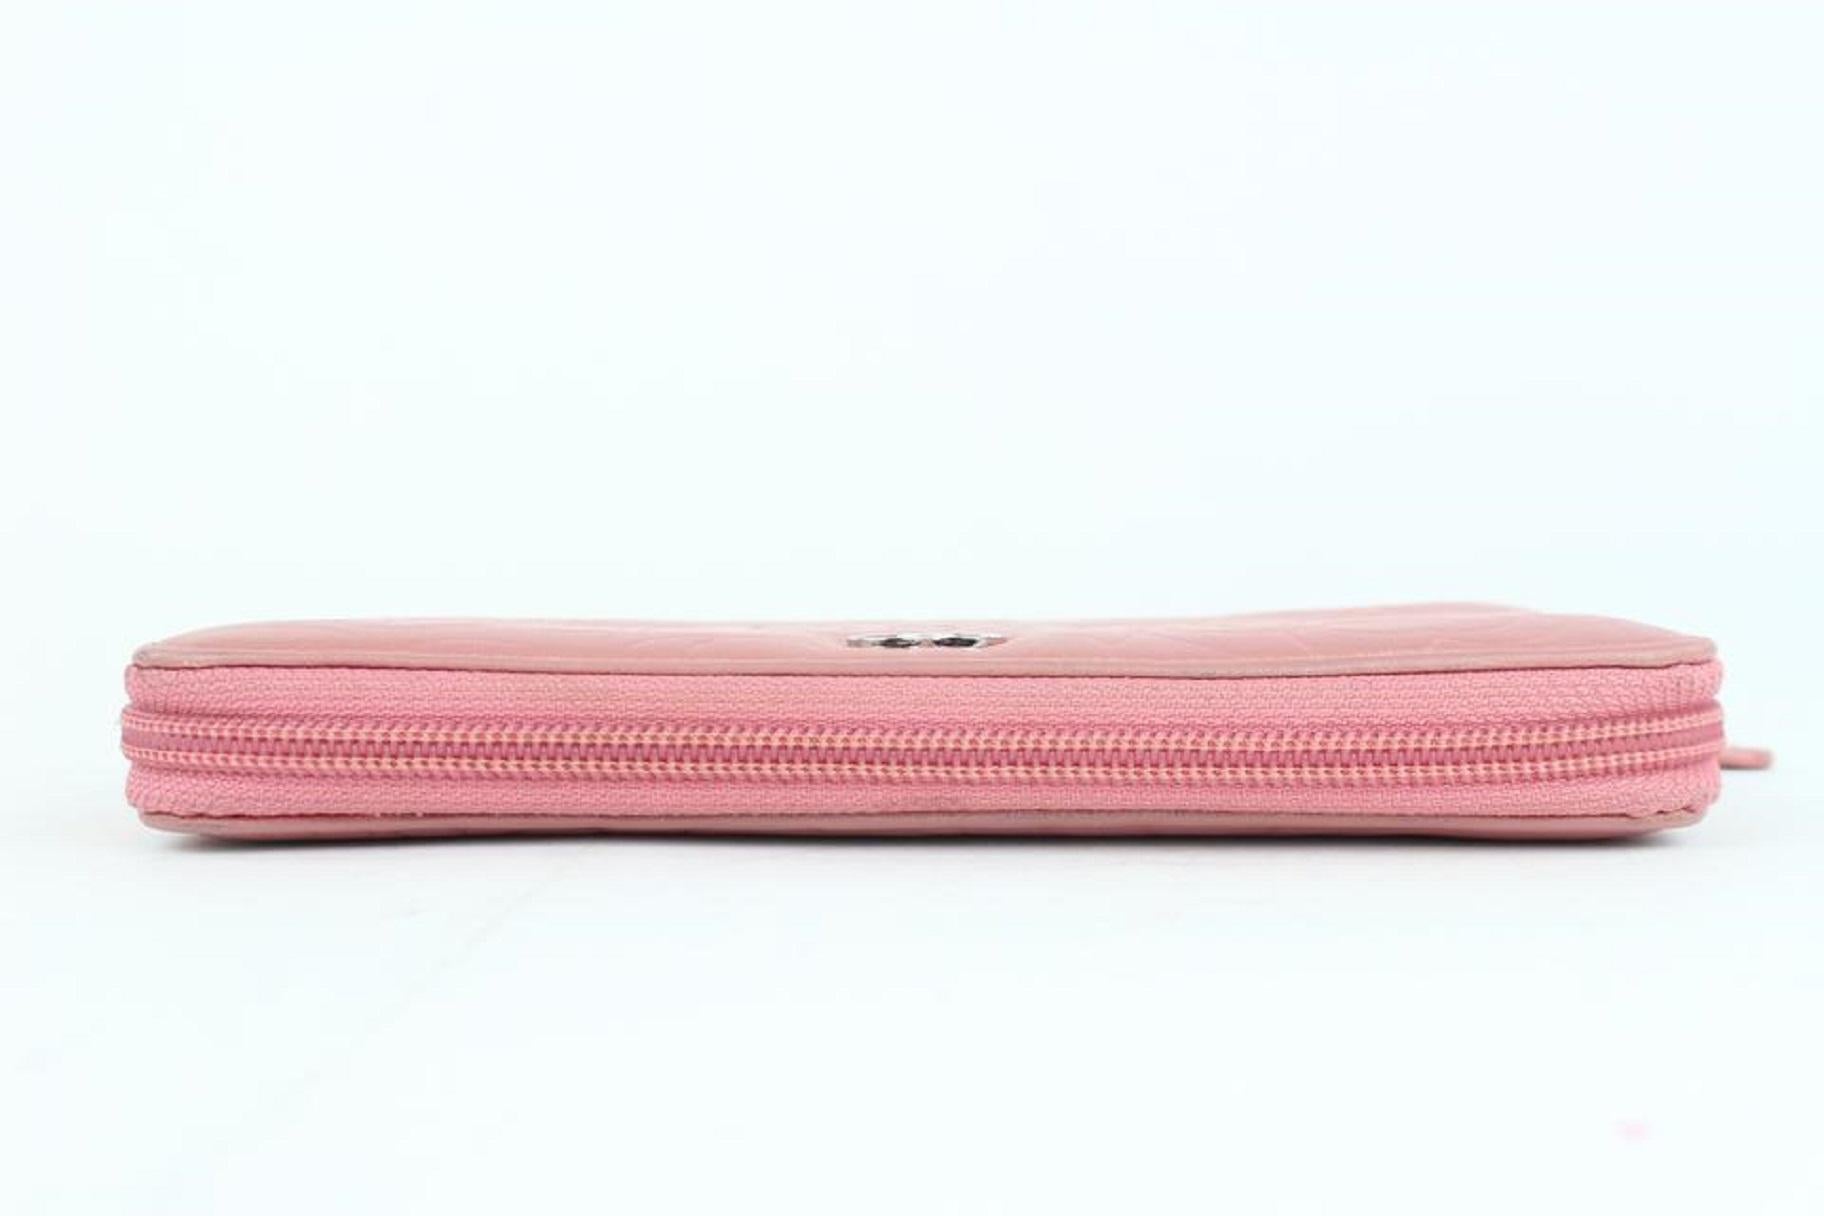 Chanel Embossed Camellia Gusset Zip Around Wallet 2cj1110 Pink Leather Clutch For Sale 4